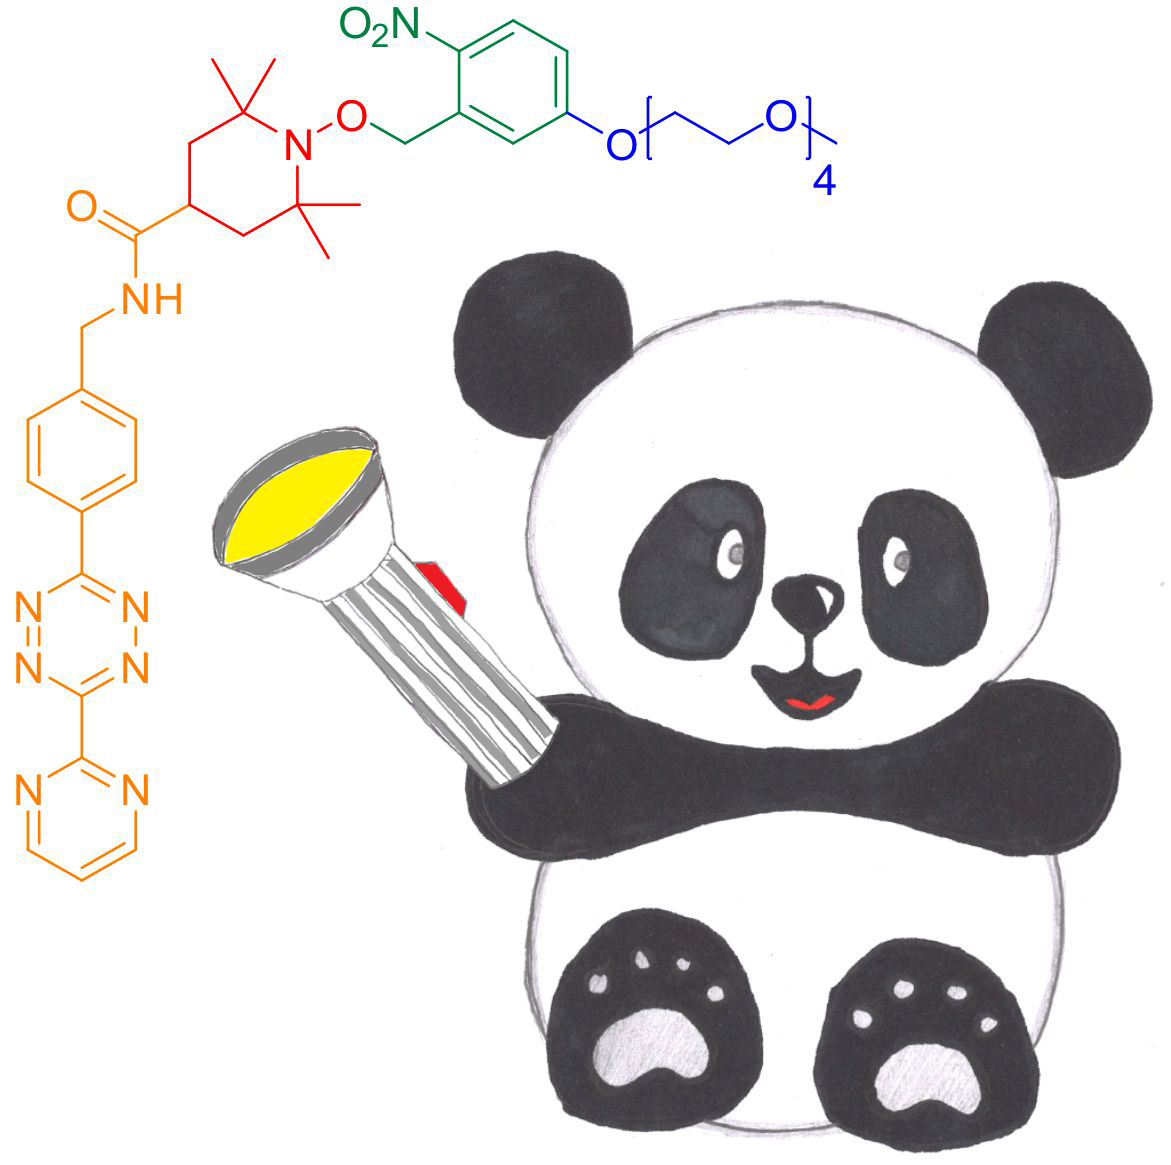 The novel photoactivatable nitroxide for DAinv reaction spin label for proteins, PaNDA. It can be ligated to proteins through a DAinv cycloaddition to genetically encoded noncanonical amino acids. Credit: Anandi Kugele